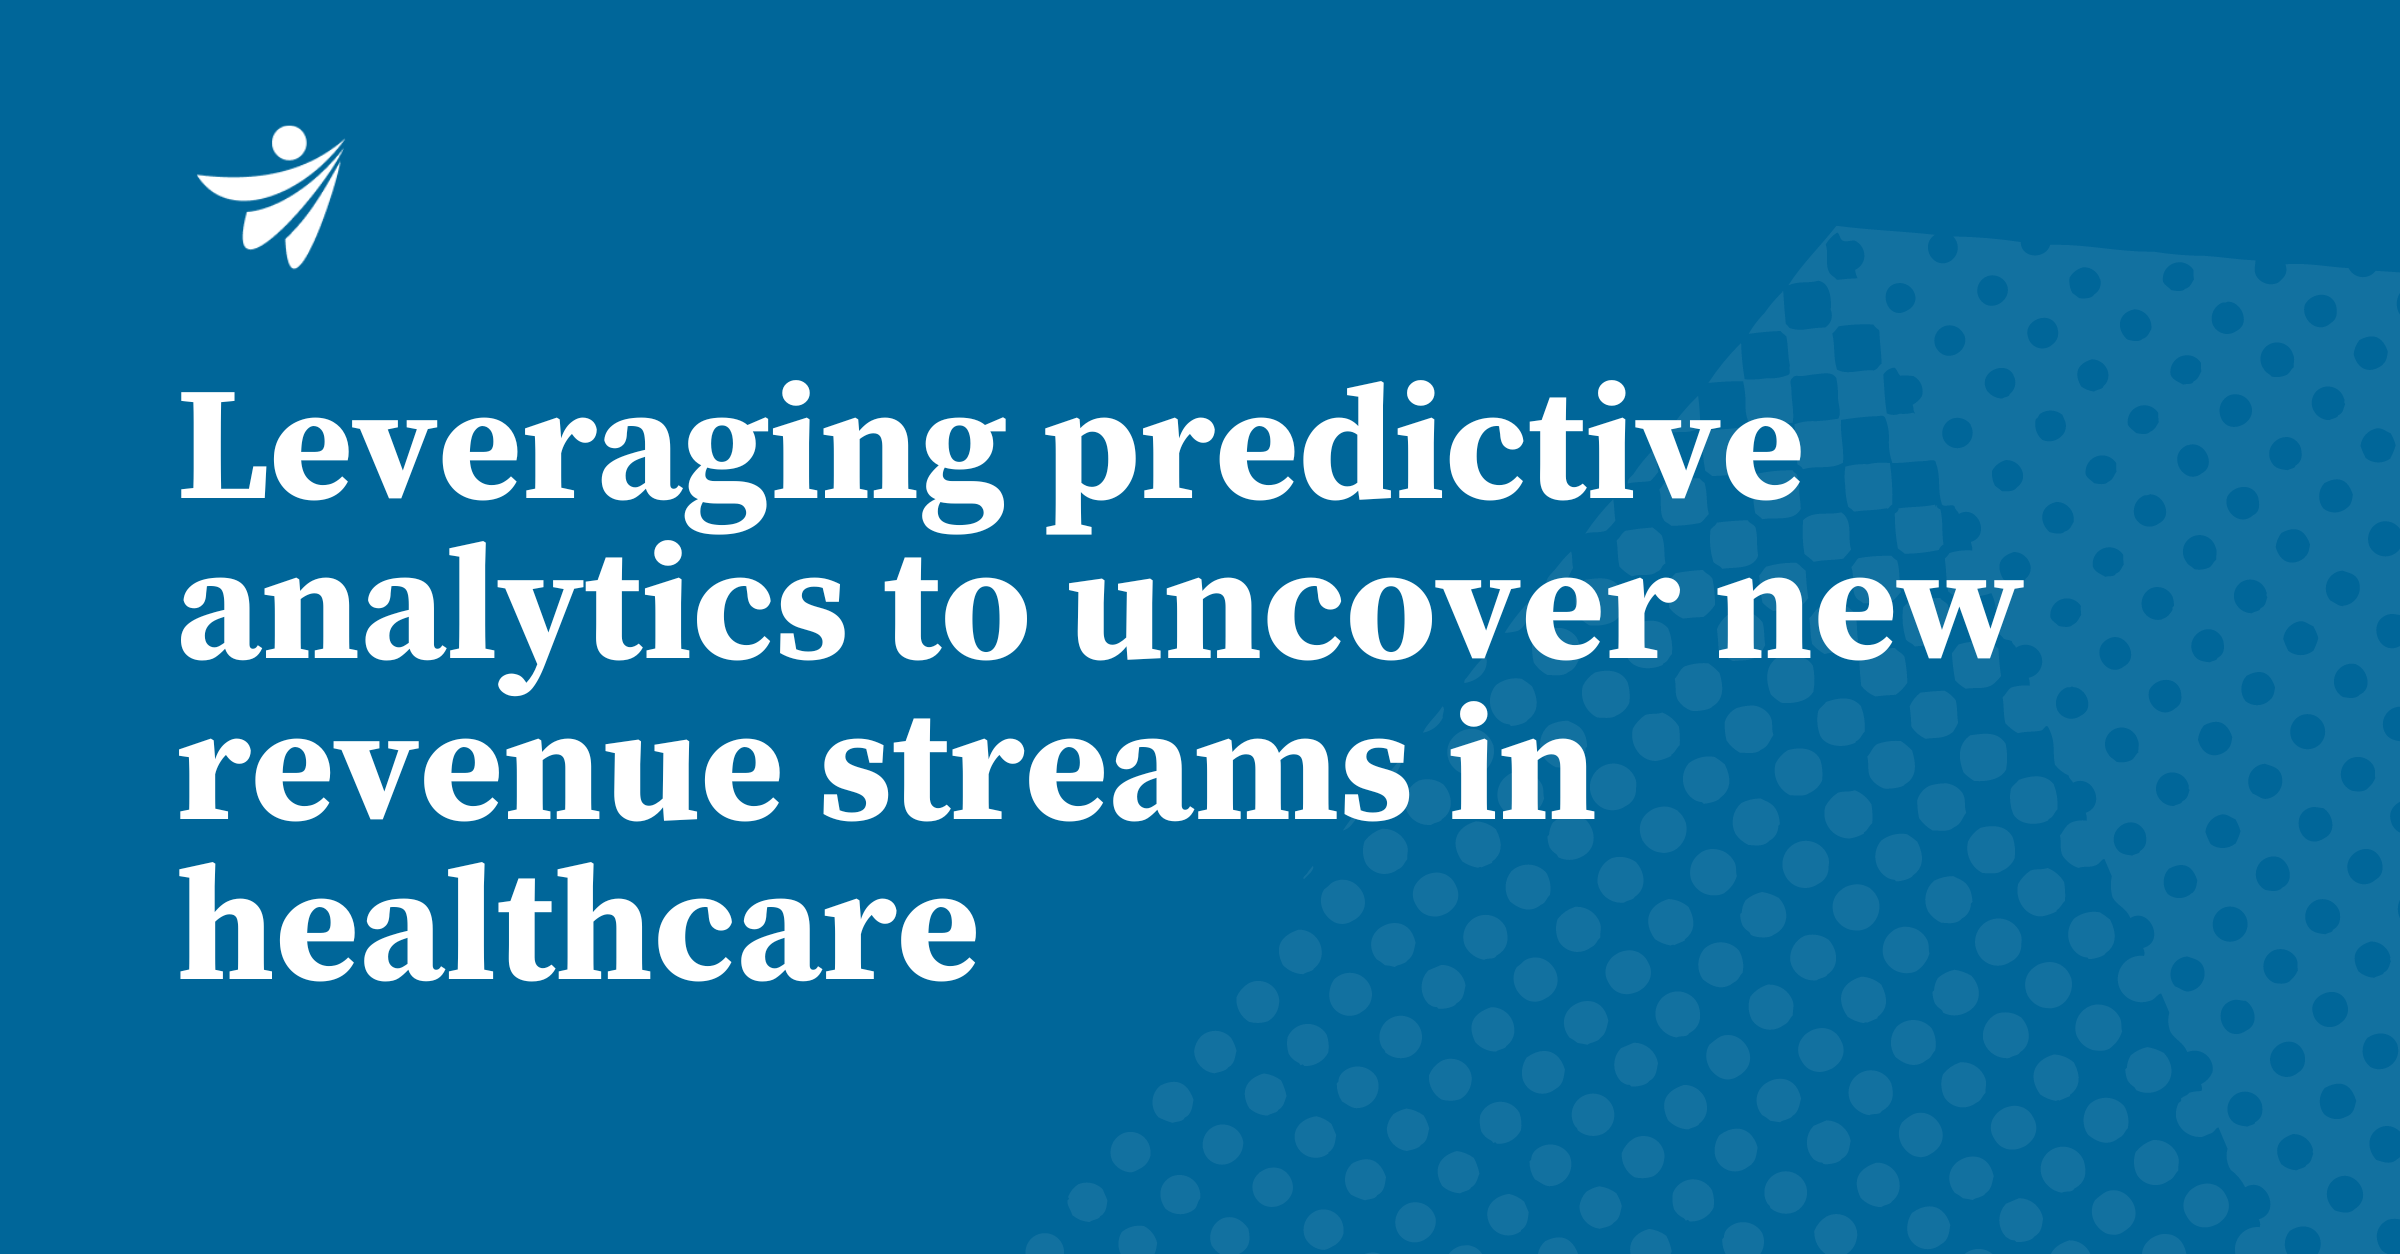 Thumbnail for Leveraging predictive analytics to uncover new revenue streams in healthcare